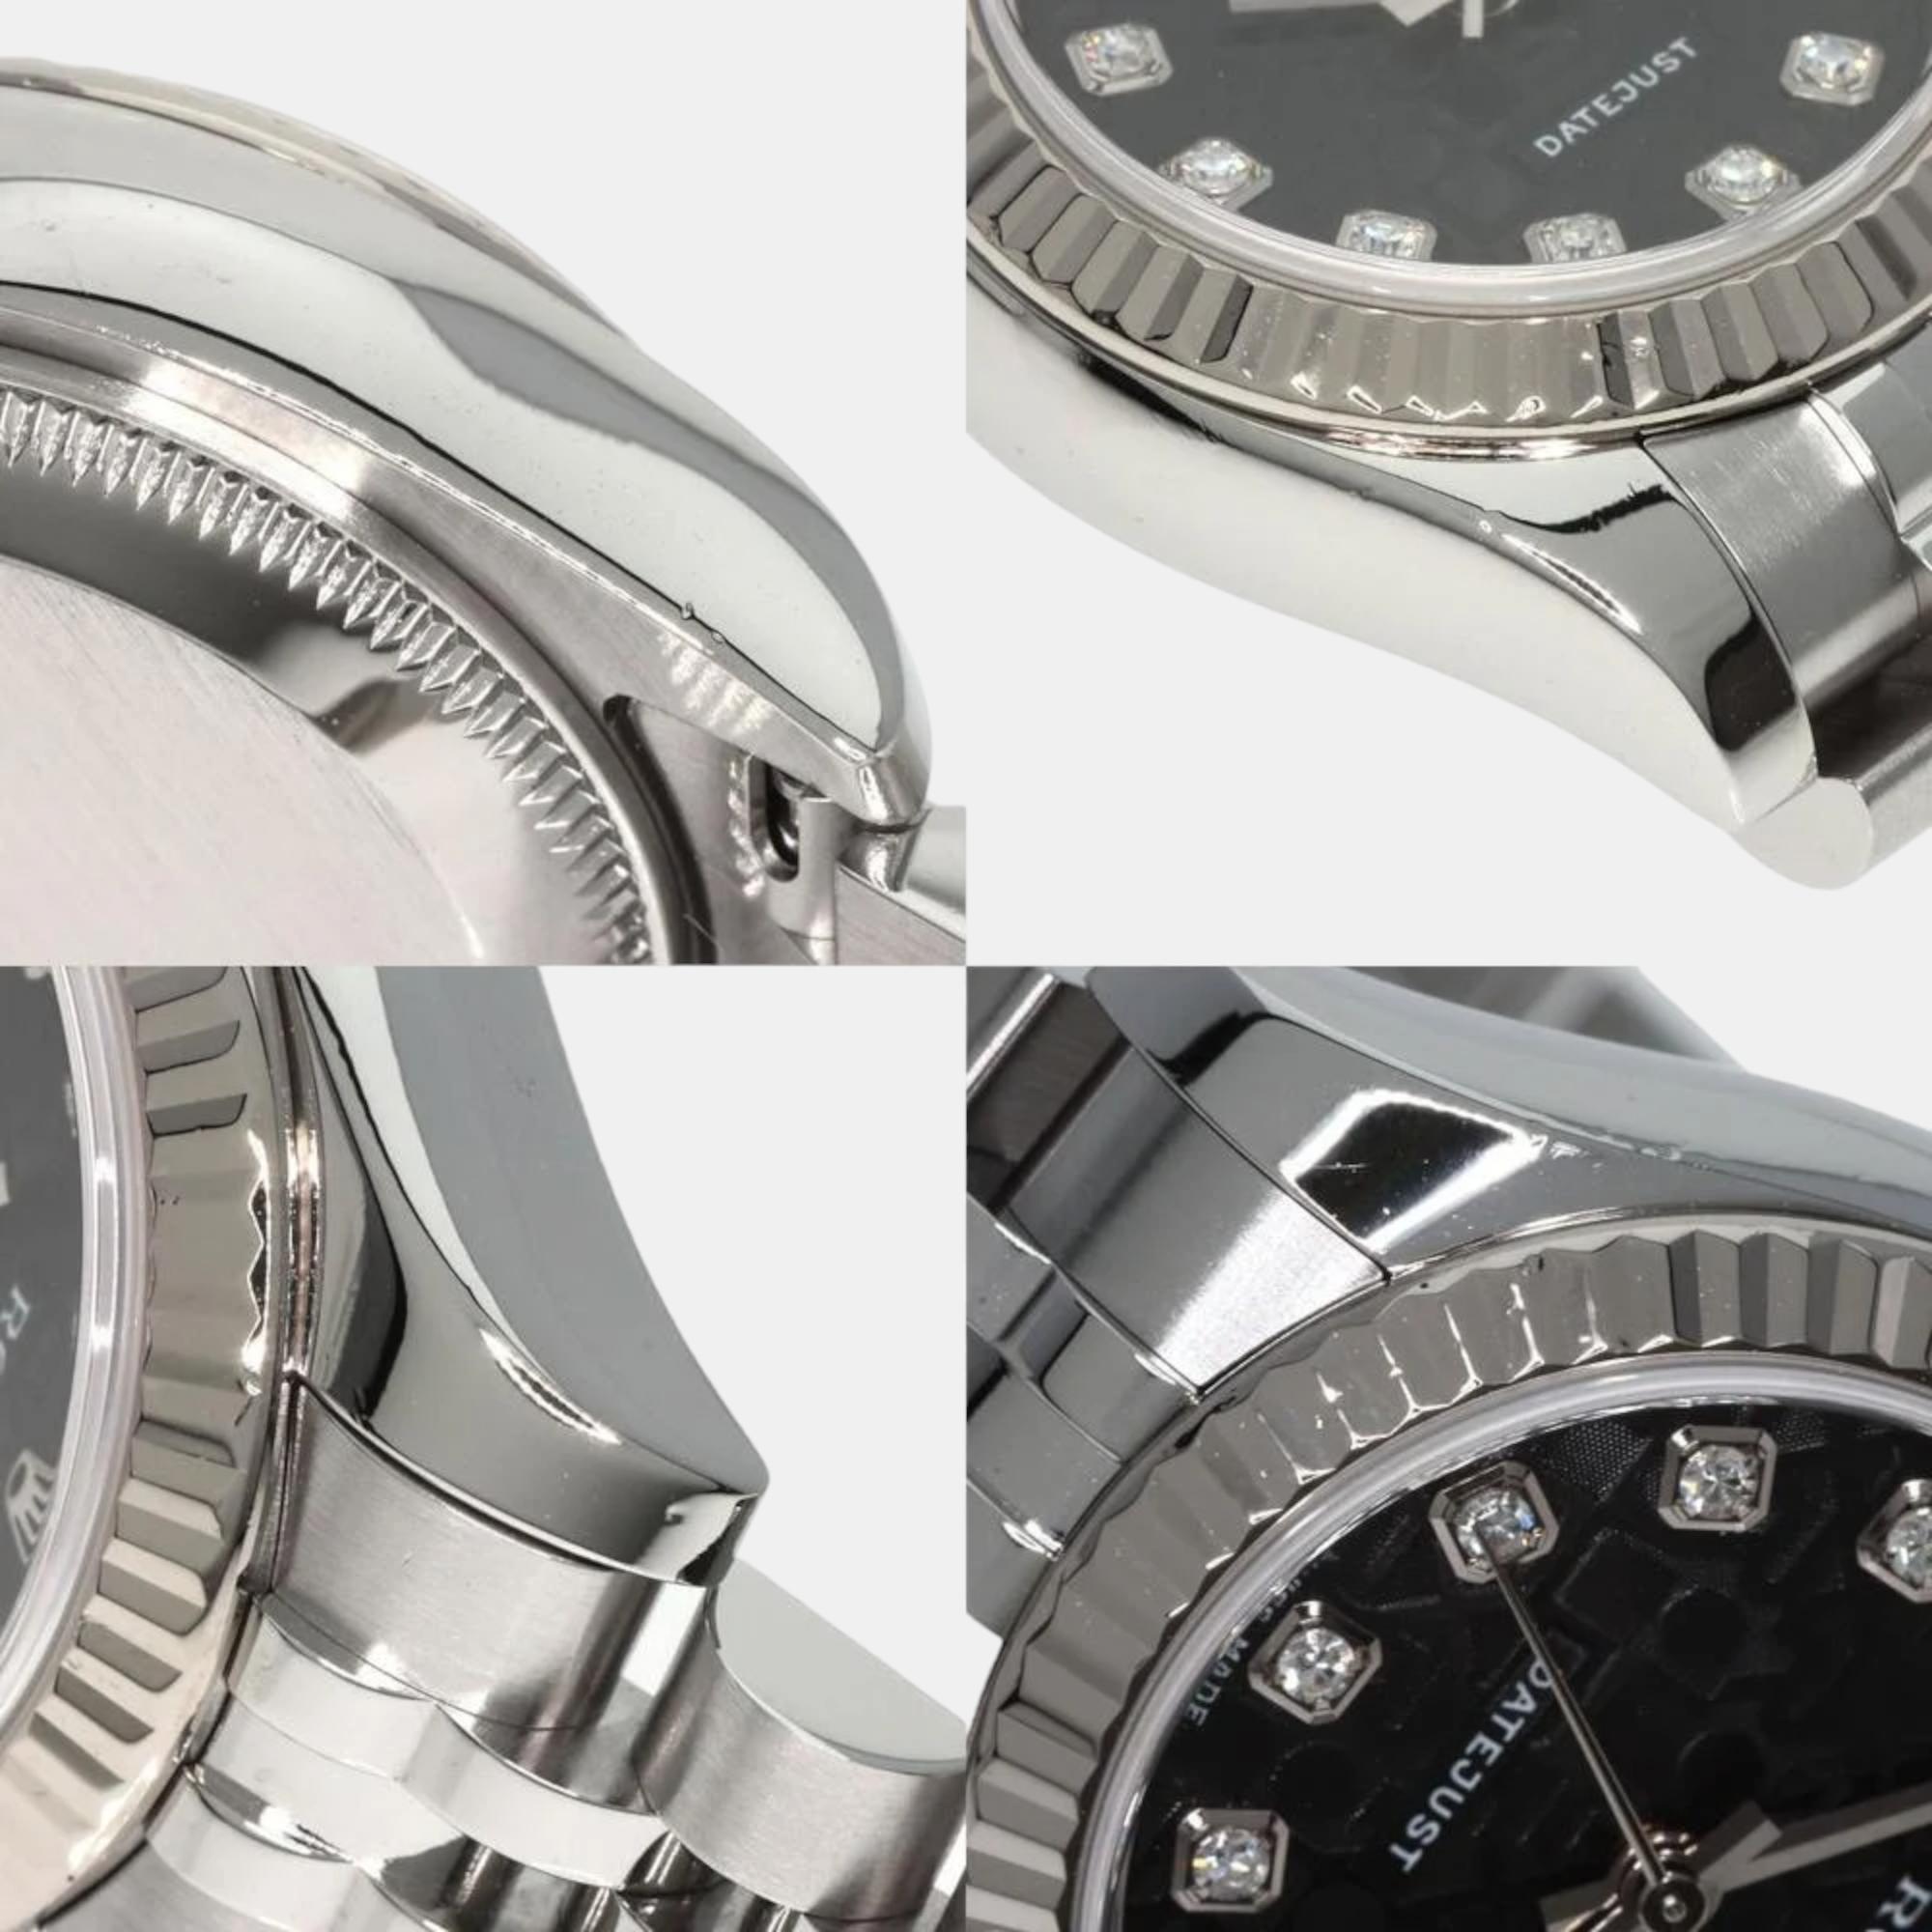 Rolex Black Diamond 18k White Gold And Stainless Steel Datejust 179174 Automatic Women's Wristwatch 26 Mm